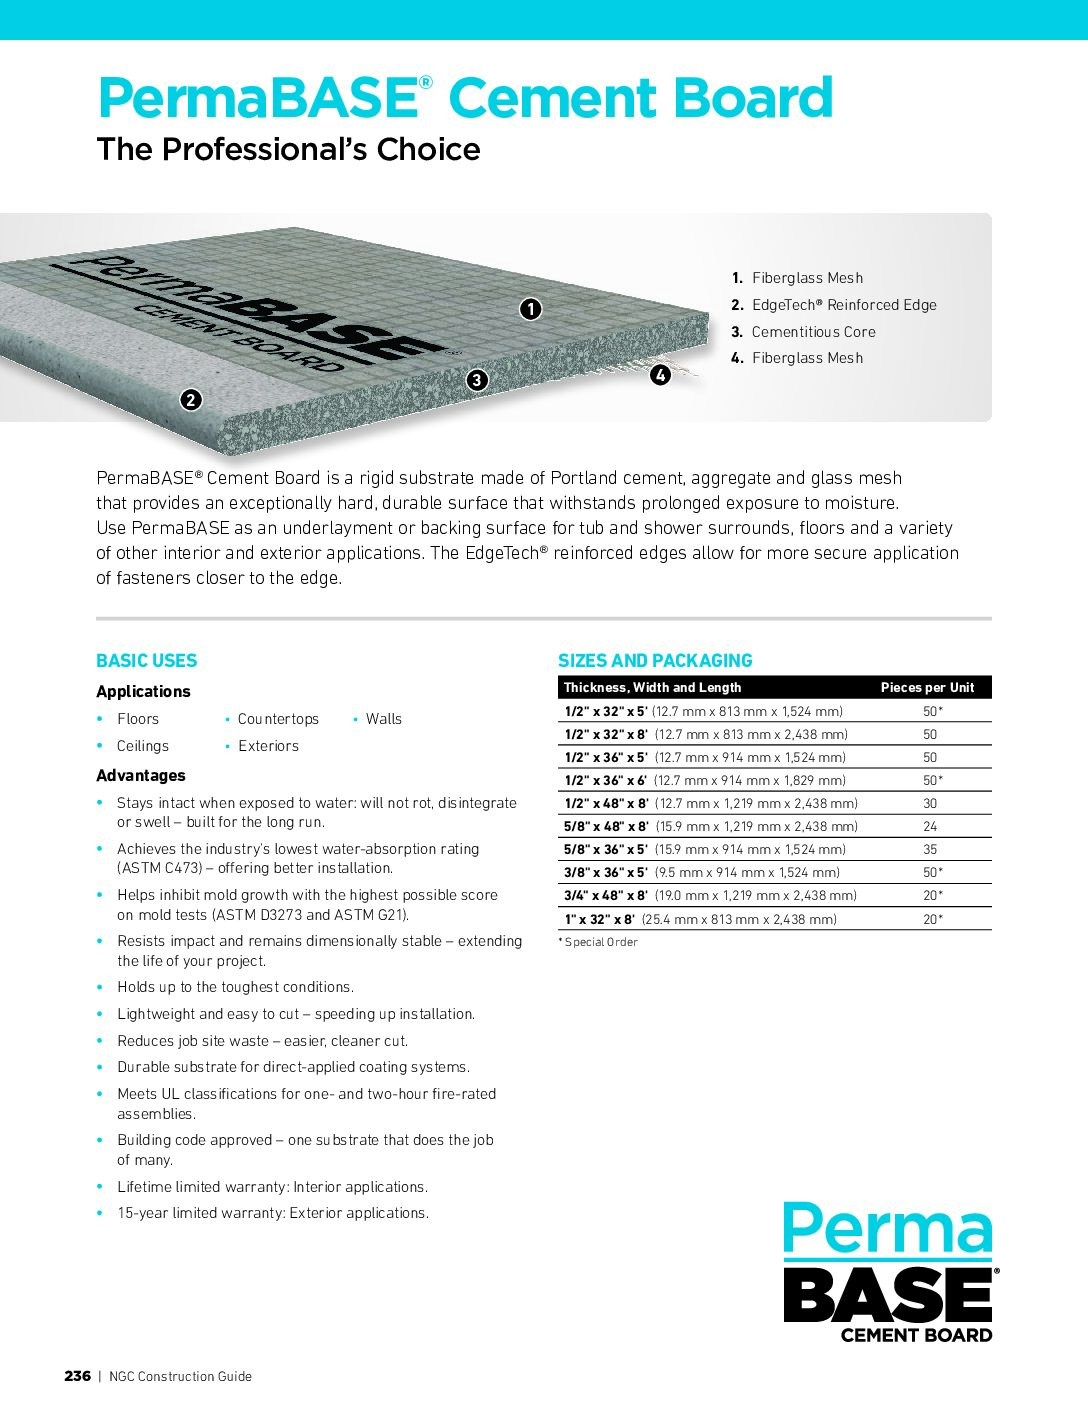 PermaBASE Cement Board NGC Construction Guide - Document Screen Grab